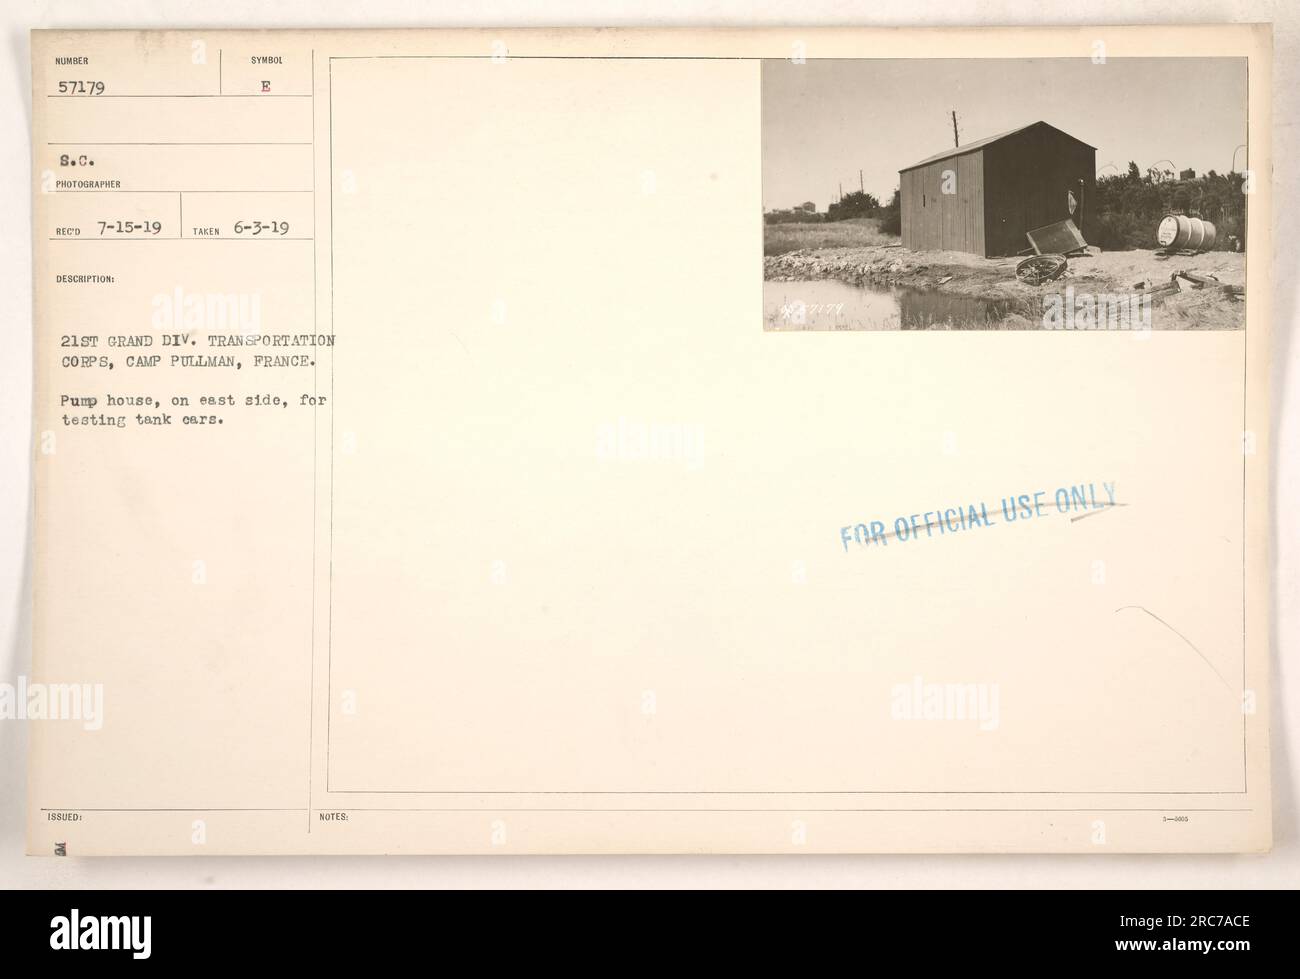 A pump house on the east side of Camp Pullman in France is used for testing tank cars. The tank cars in question have the number 57179 S.C. This photograph was taken by RECO on July 15, 1919 and described as belonging to the 21st Grand Division Transportation Corps. Stock Photo